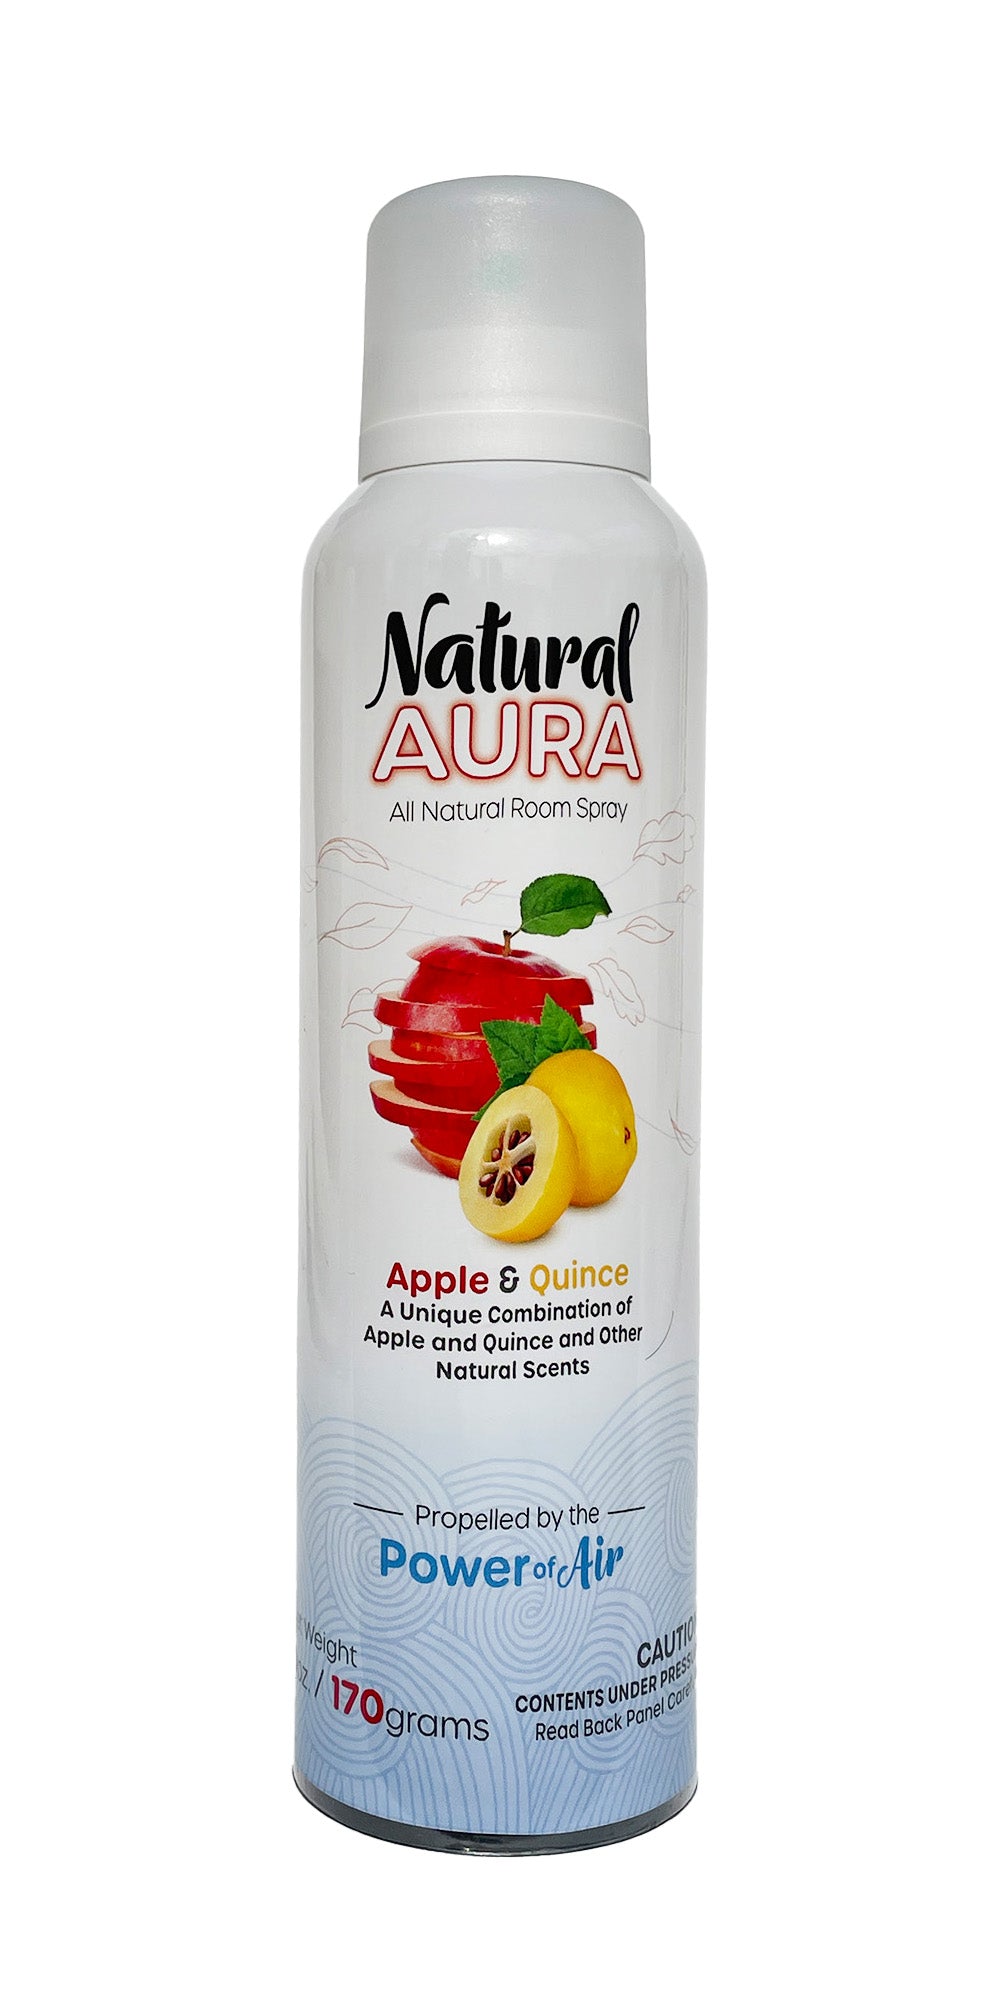 Bottle of Natural Aura Apple and Quince Room Spray with a white background.